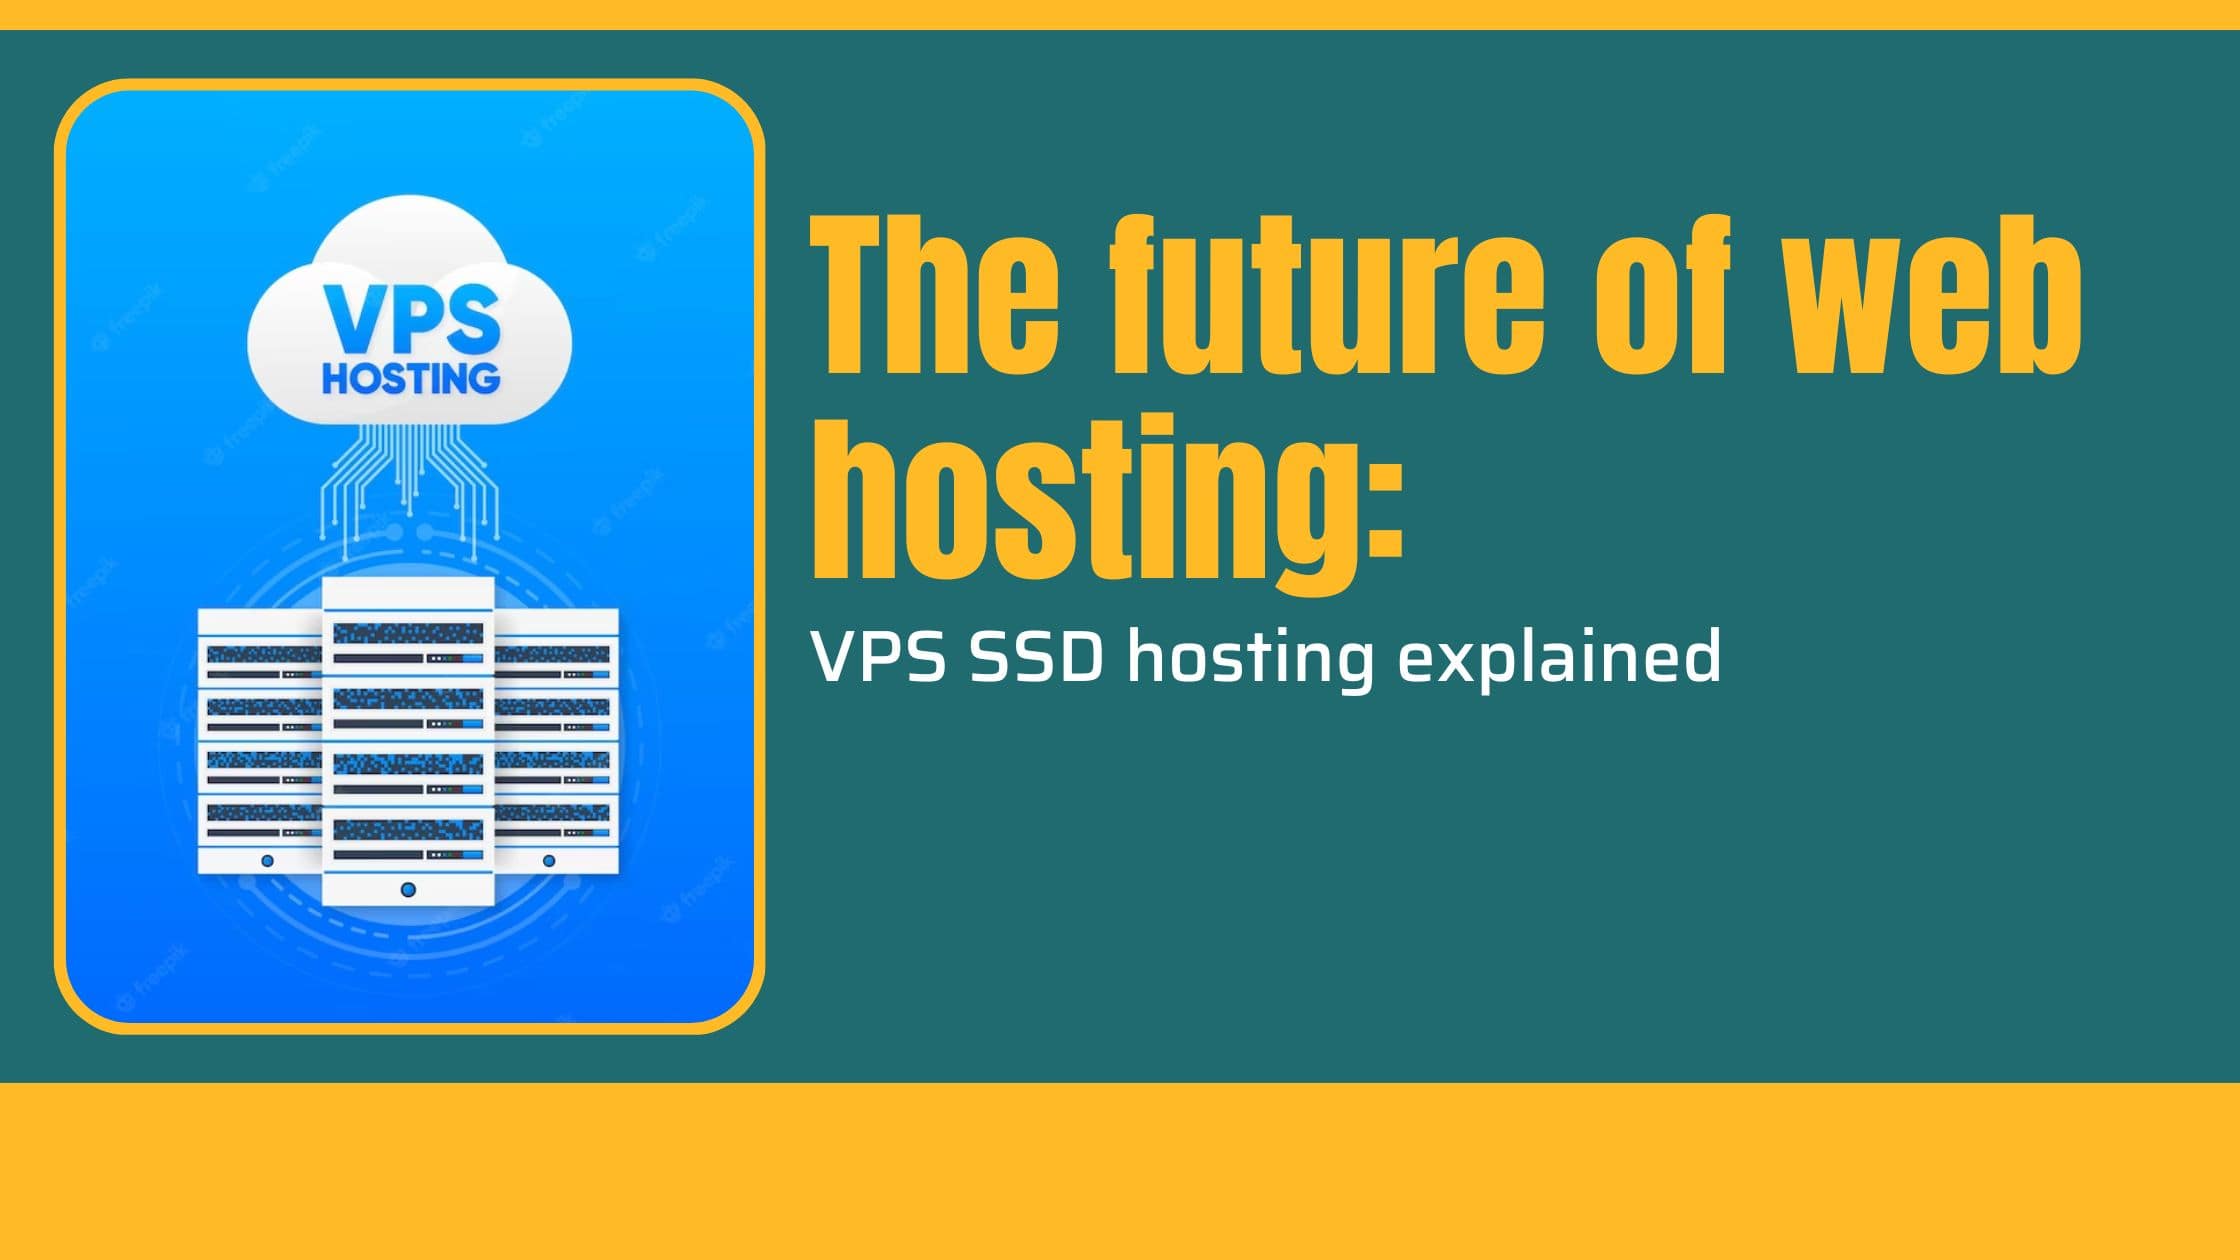 The future of web hosting: VPS SSD hosting explained